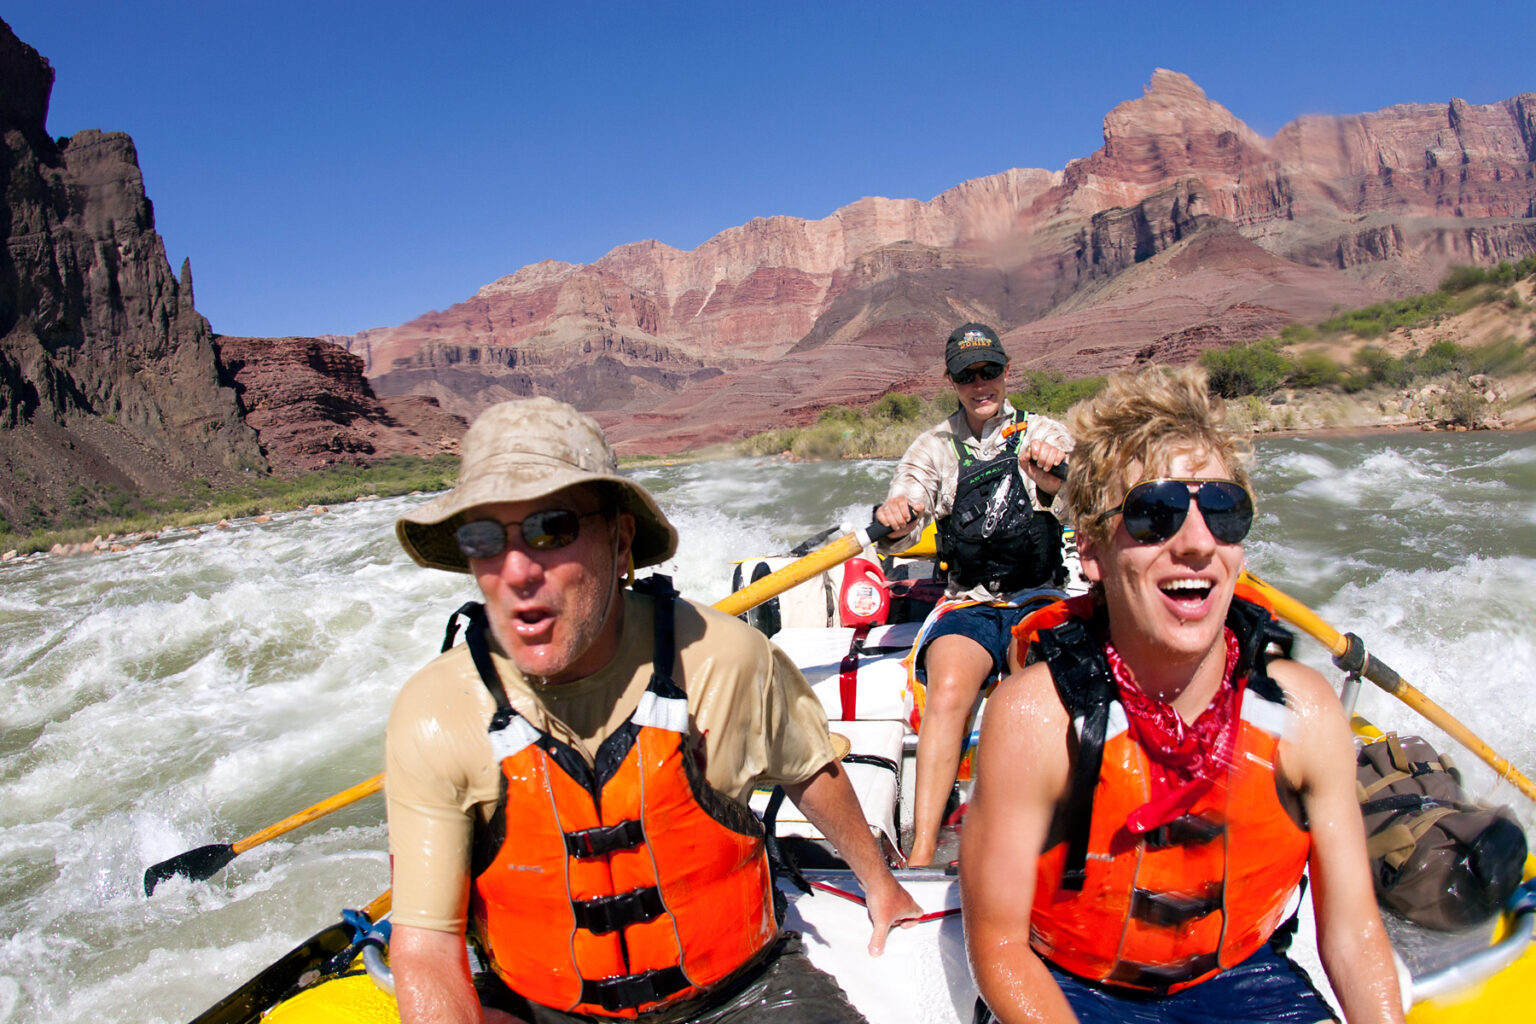 Father and son laughing as guide steers raft through whitewater in Grand Canyon